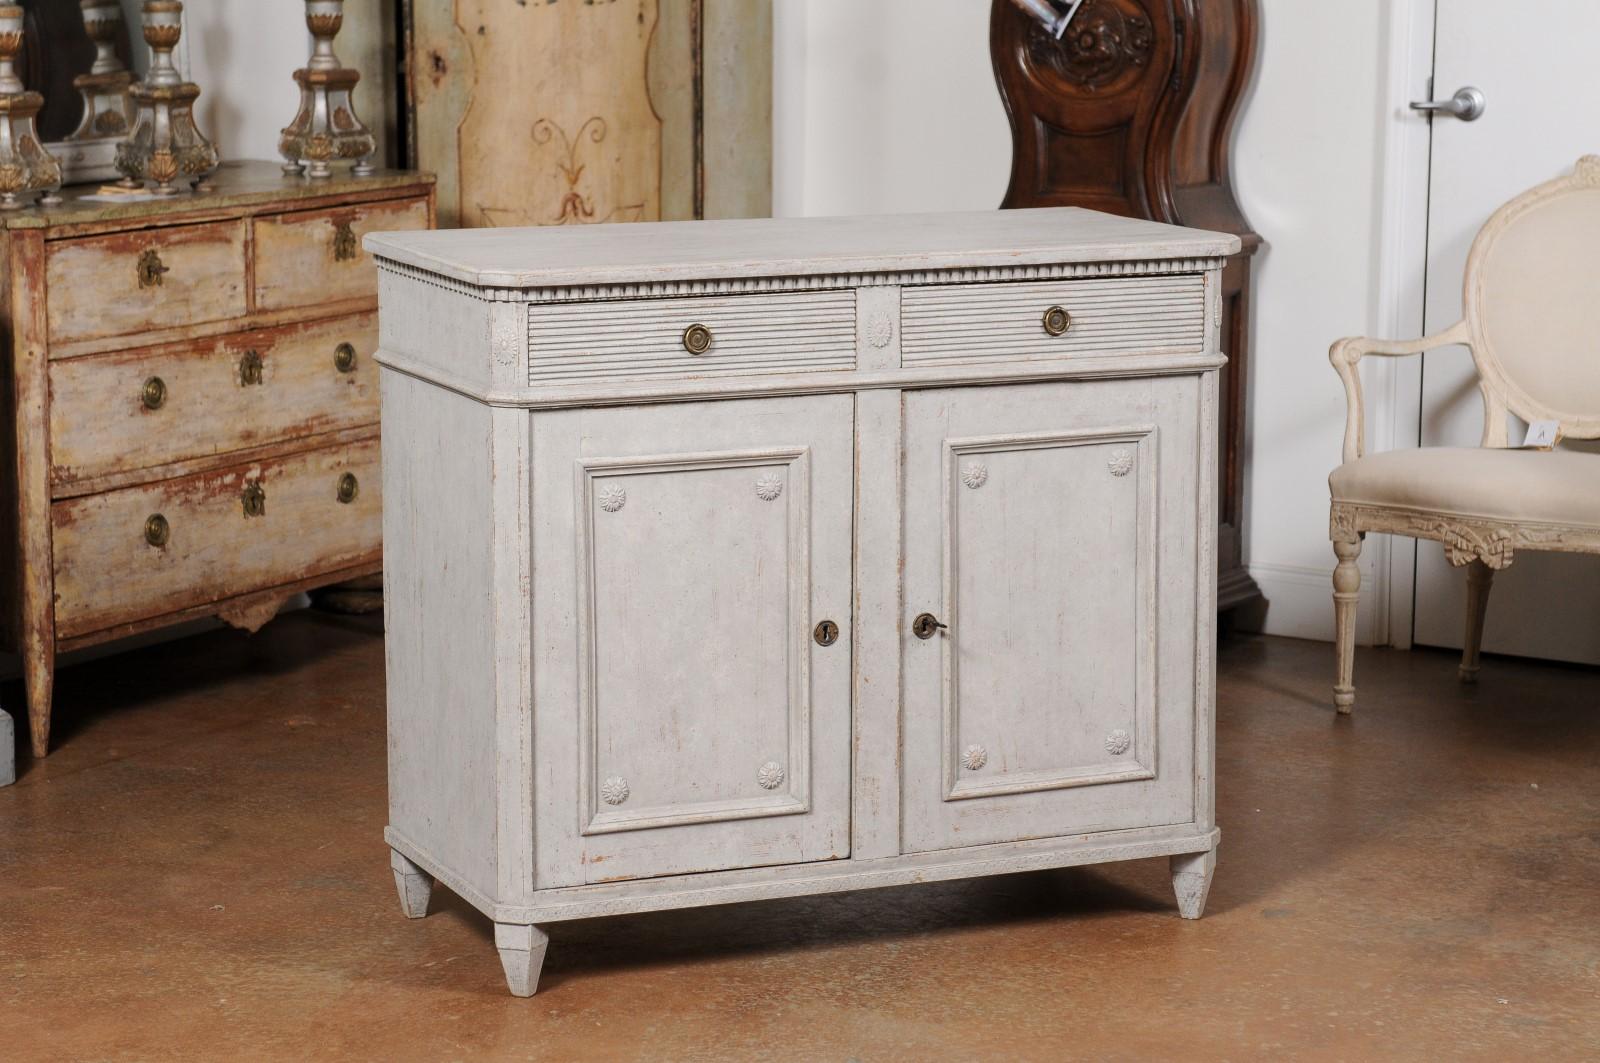 A Swedish Gustavian style painted wood sideboard from the late 19th century, with two drawers over two doors. Created in Sweden during the last quarter of the 19th century, this painted wood sideboard features a rectangular top with canted corners